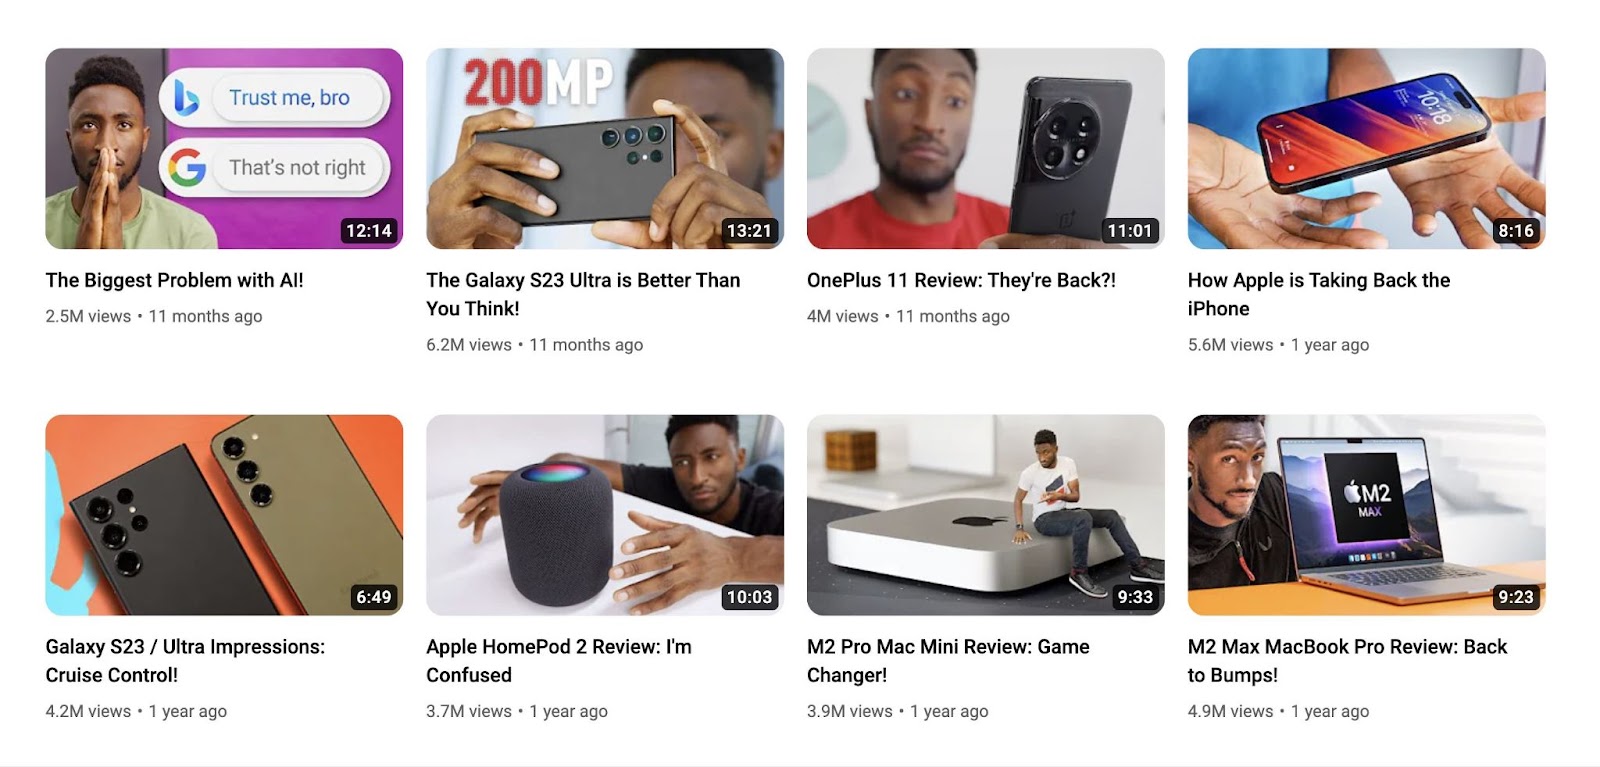 A section of Marques Brownlee's channel, showing video thumbnails featuring shots of the products